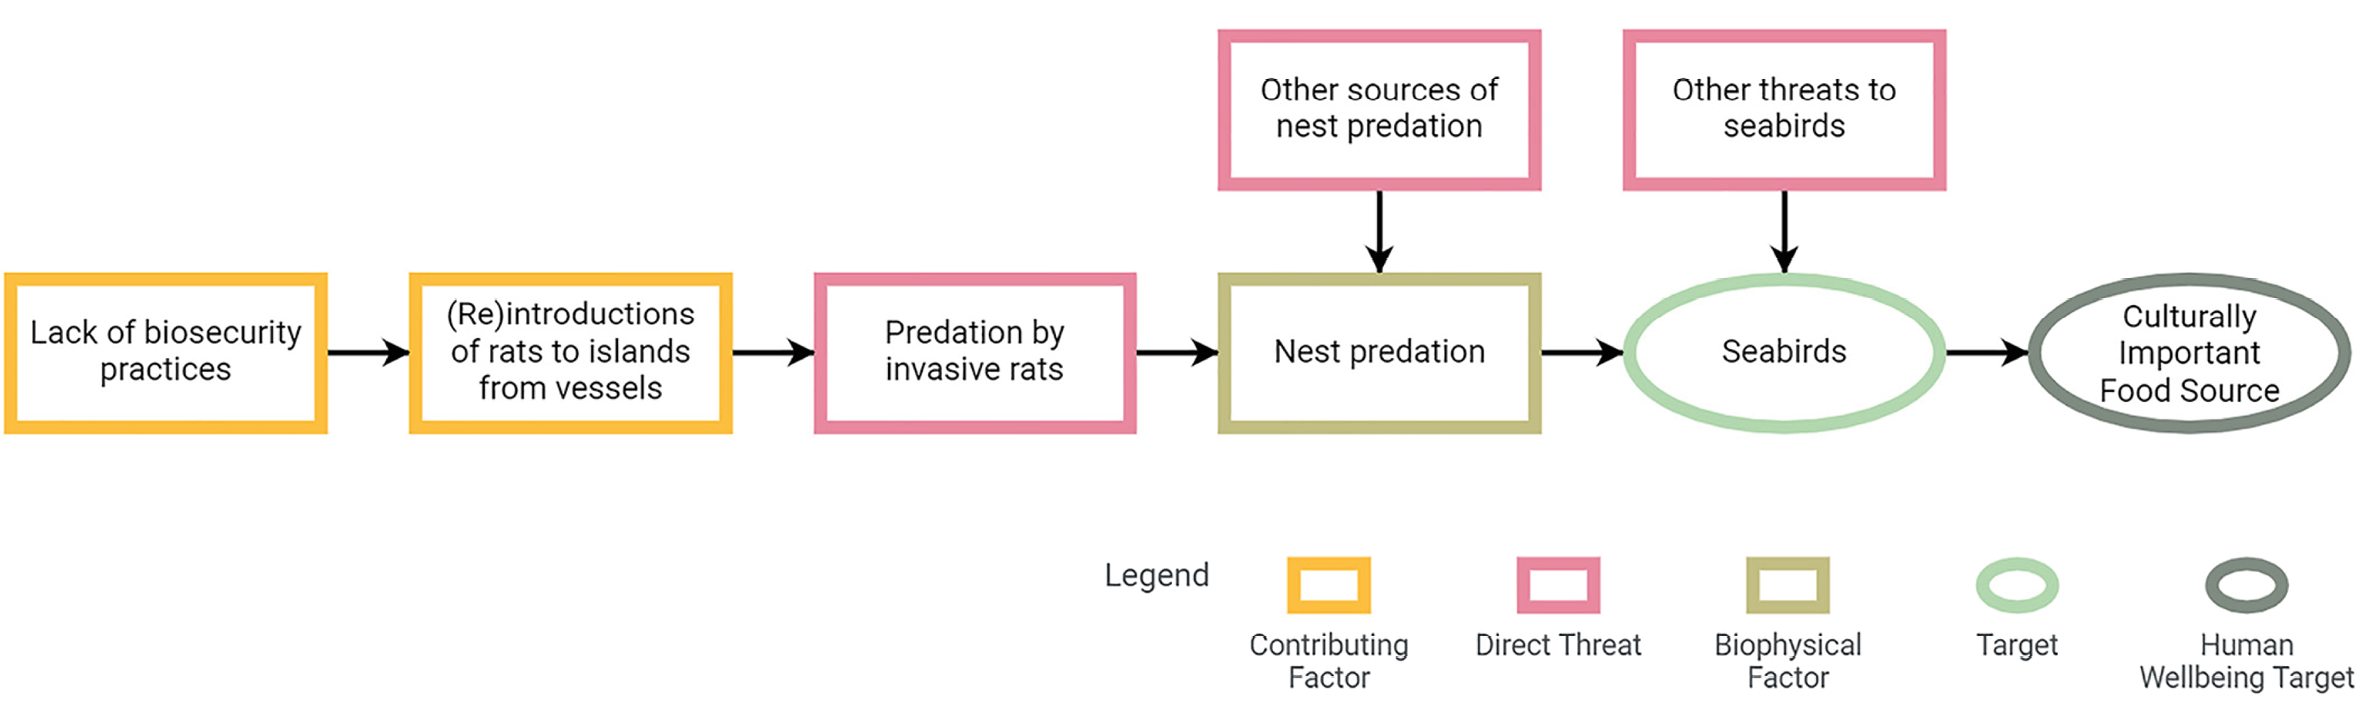 A linear flow diagram illustrating how the threats of invasive rodent predation and associated contributing factors are linked to seabirds.